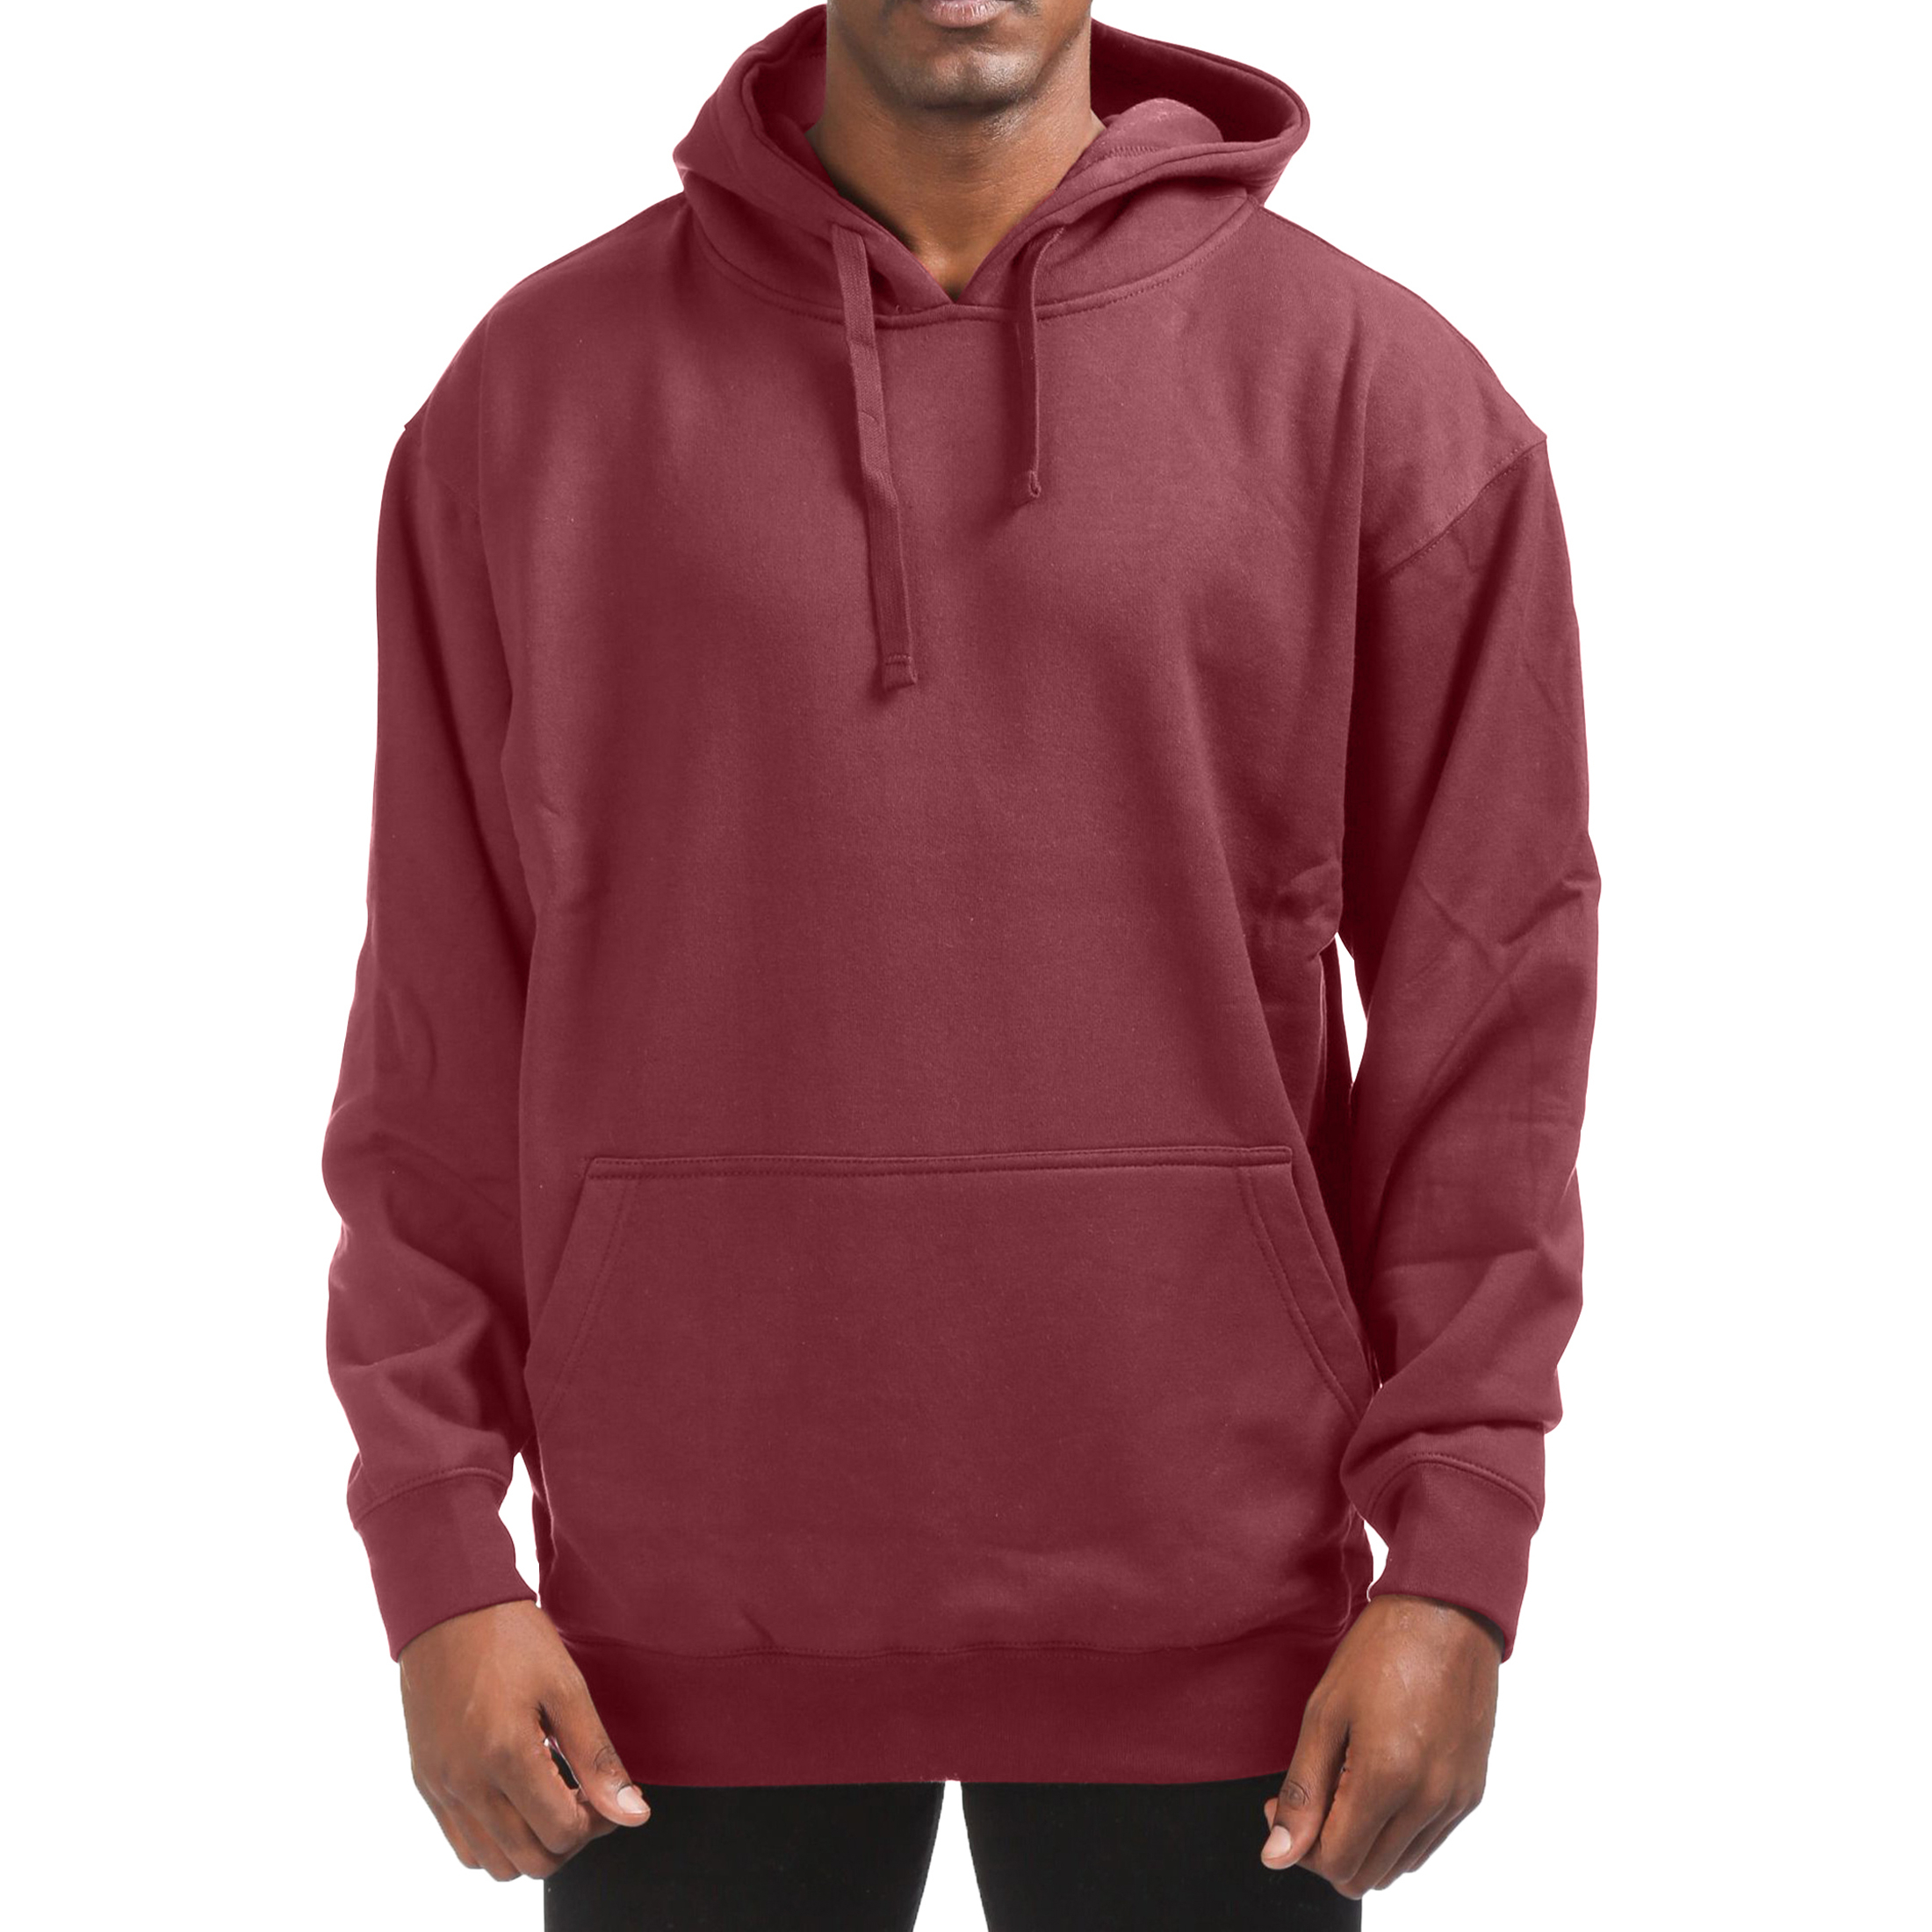 Men's Cotton-Blend Fleece Pullover Hoodie With Pocket (Big & Tall Sizes Available) - Burgundy, 2X-Large